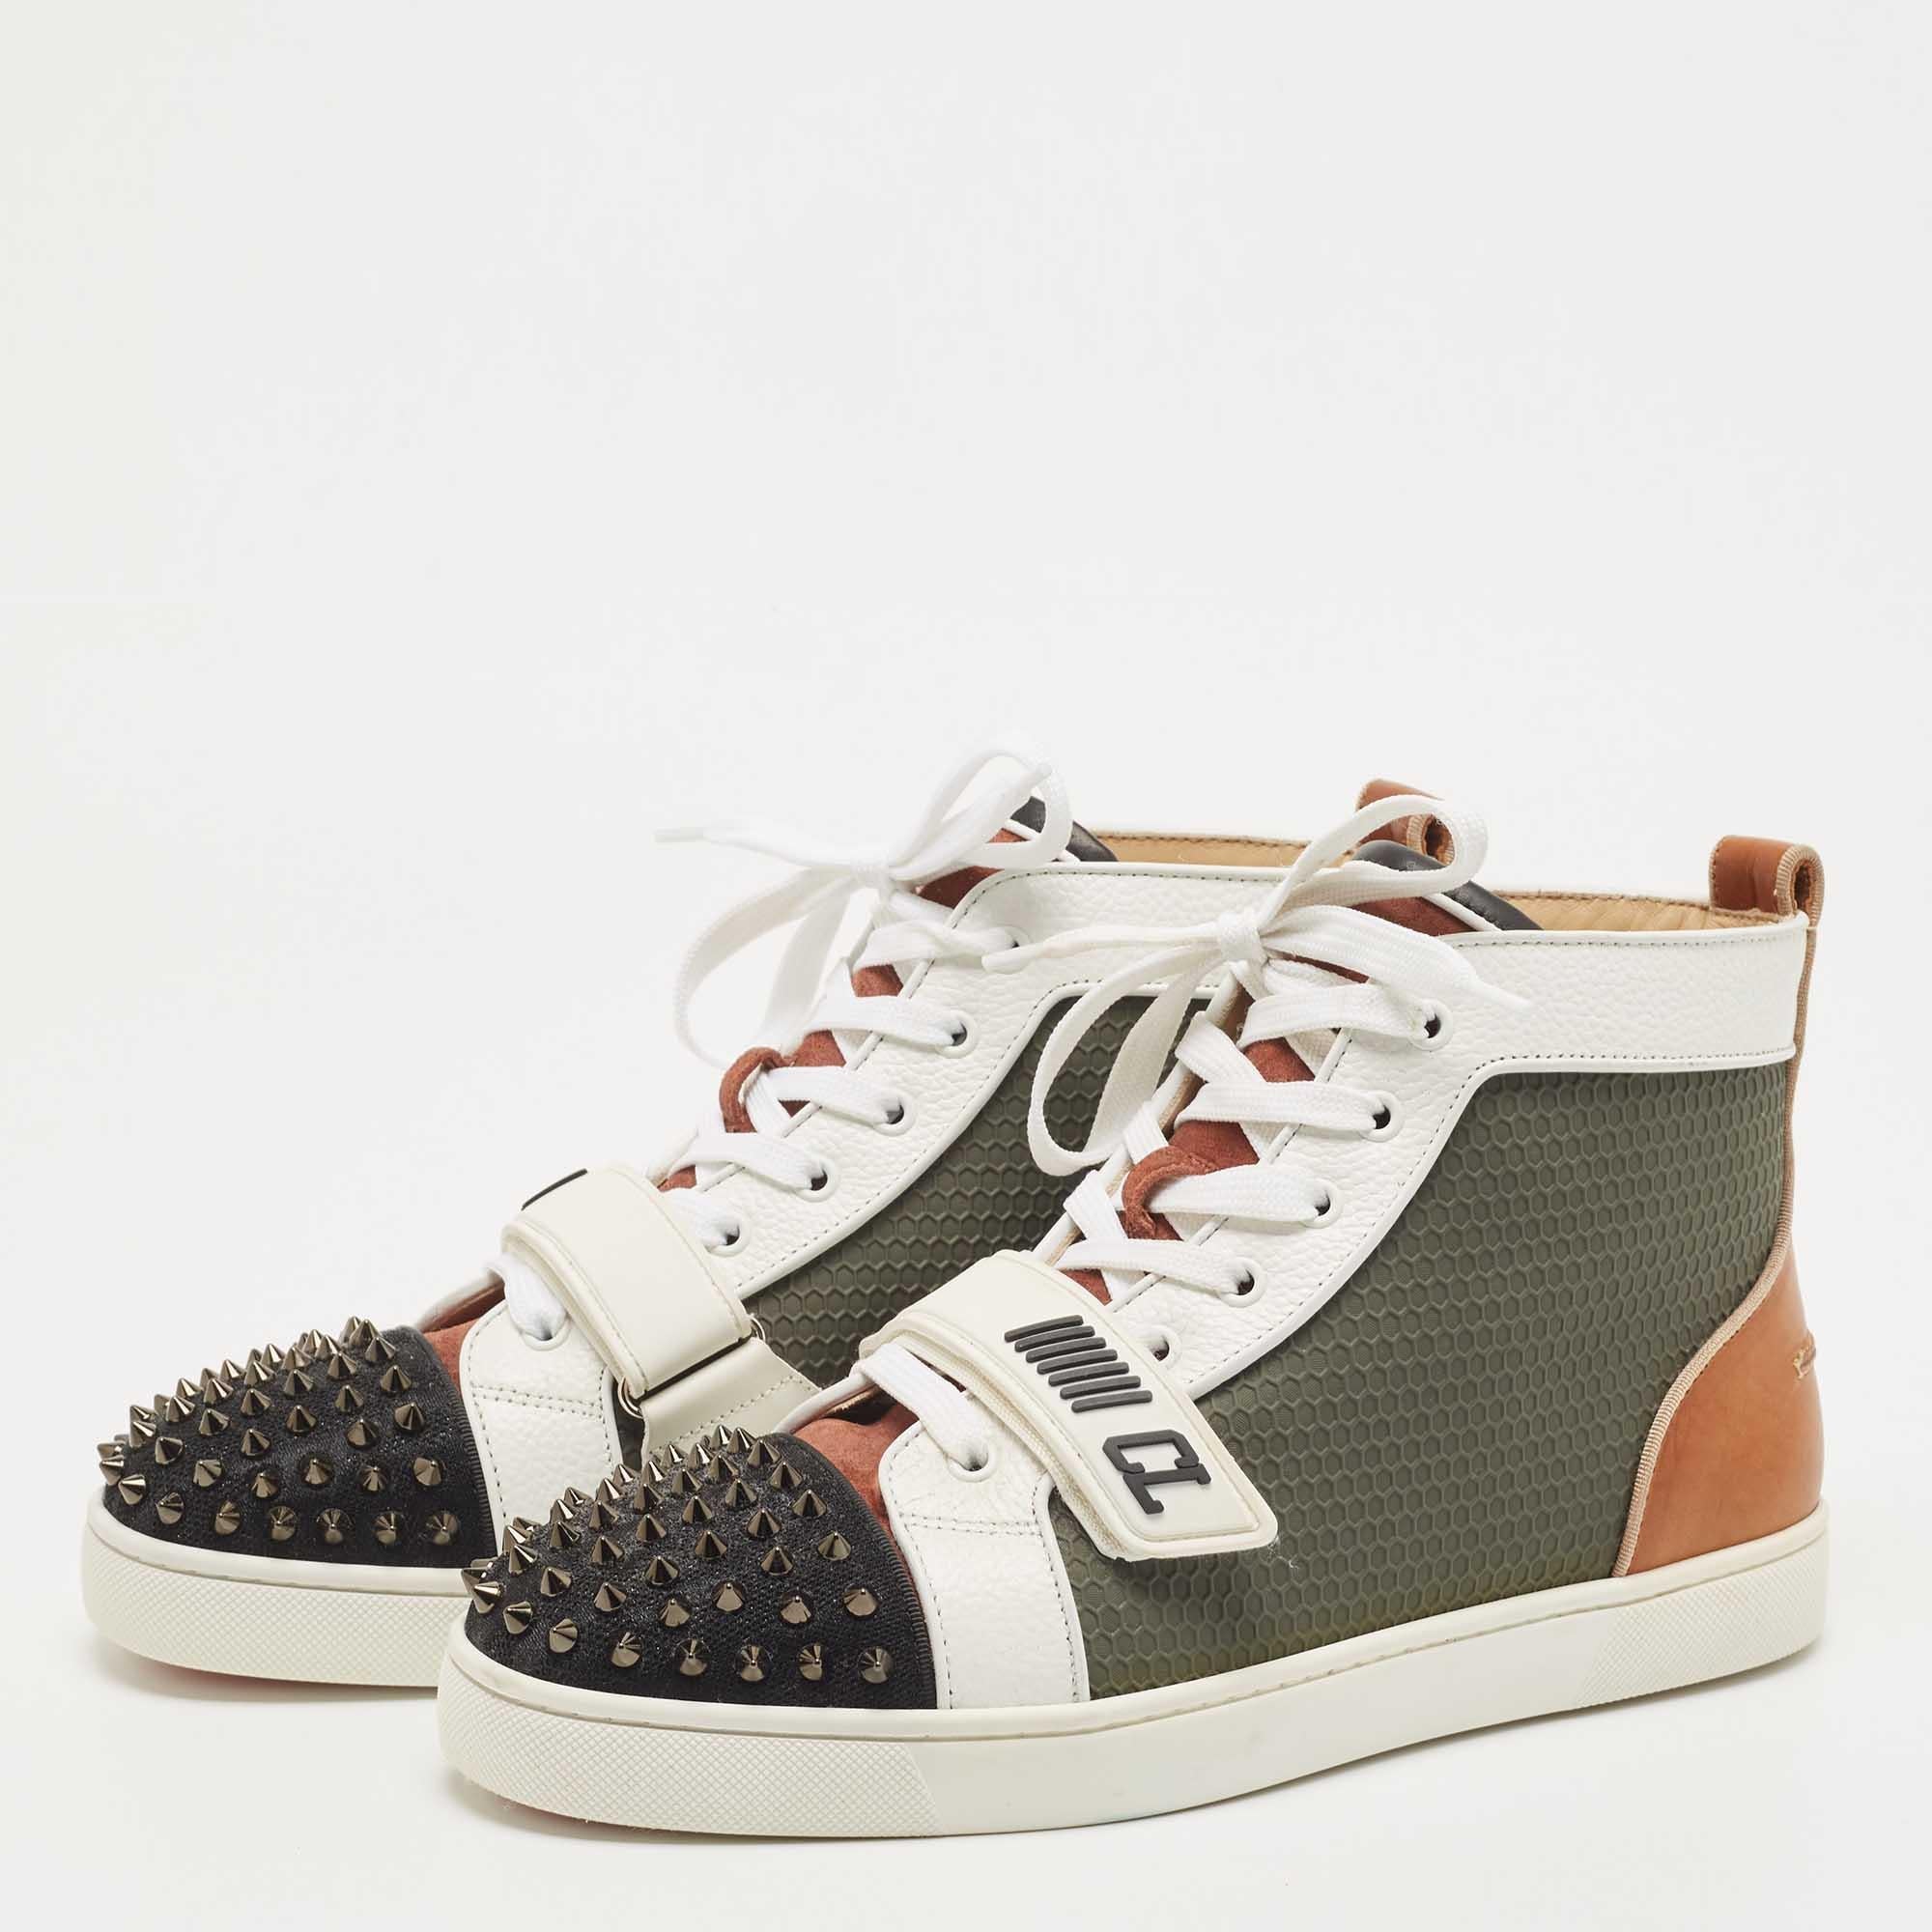 Christian Louboutin Multicolor Leather Lou Spike High Top Sneakers Size 42 4